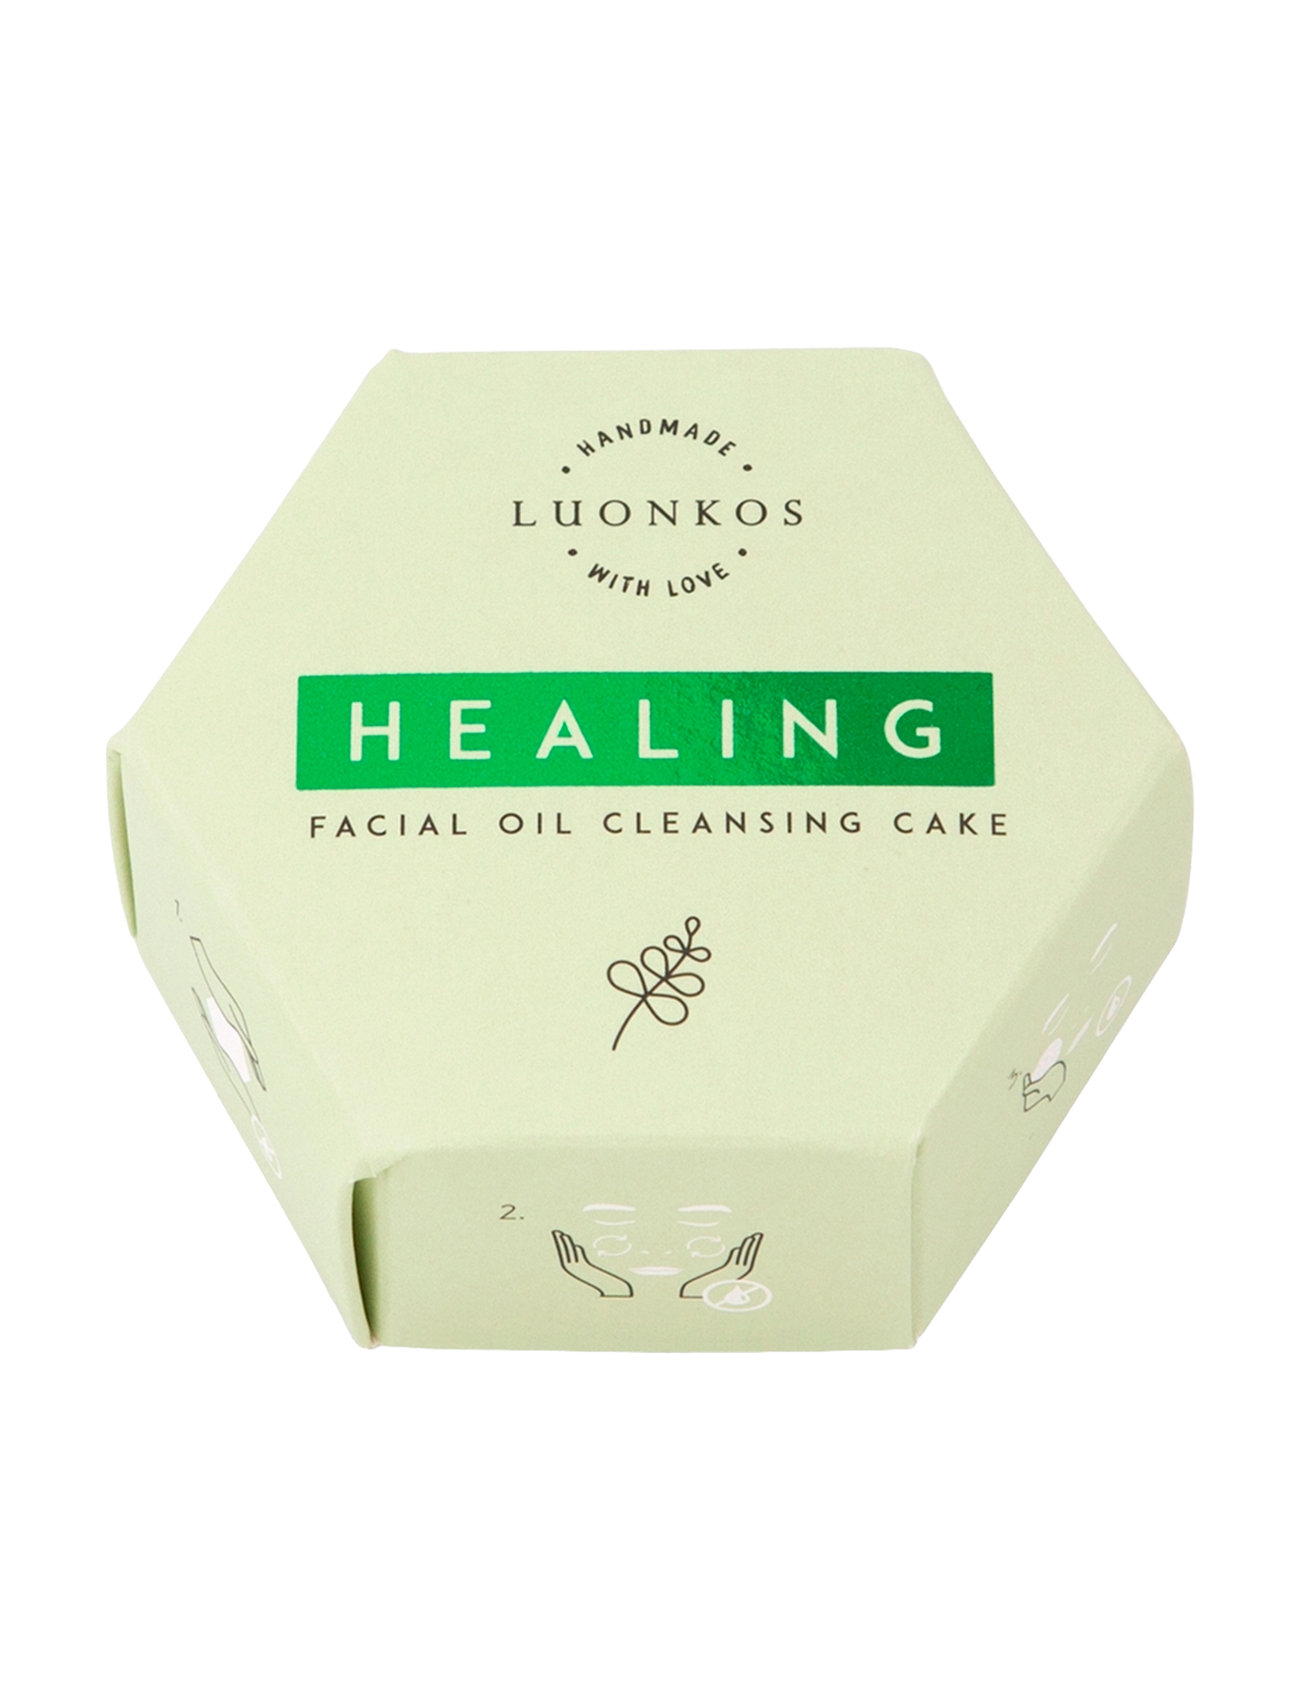 Healing Facial Oil Cleansing Cake Beauty Women Skin Care Face Cleansers Oil Cleanser Green Luonkos